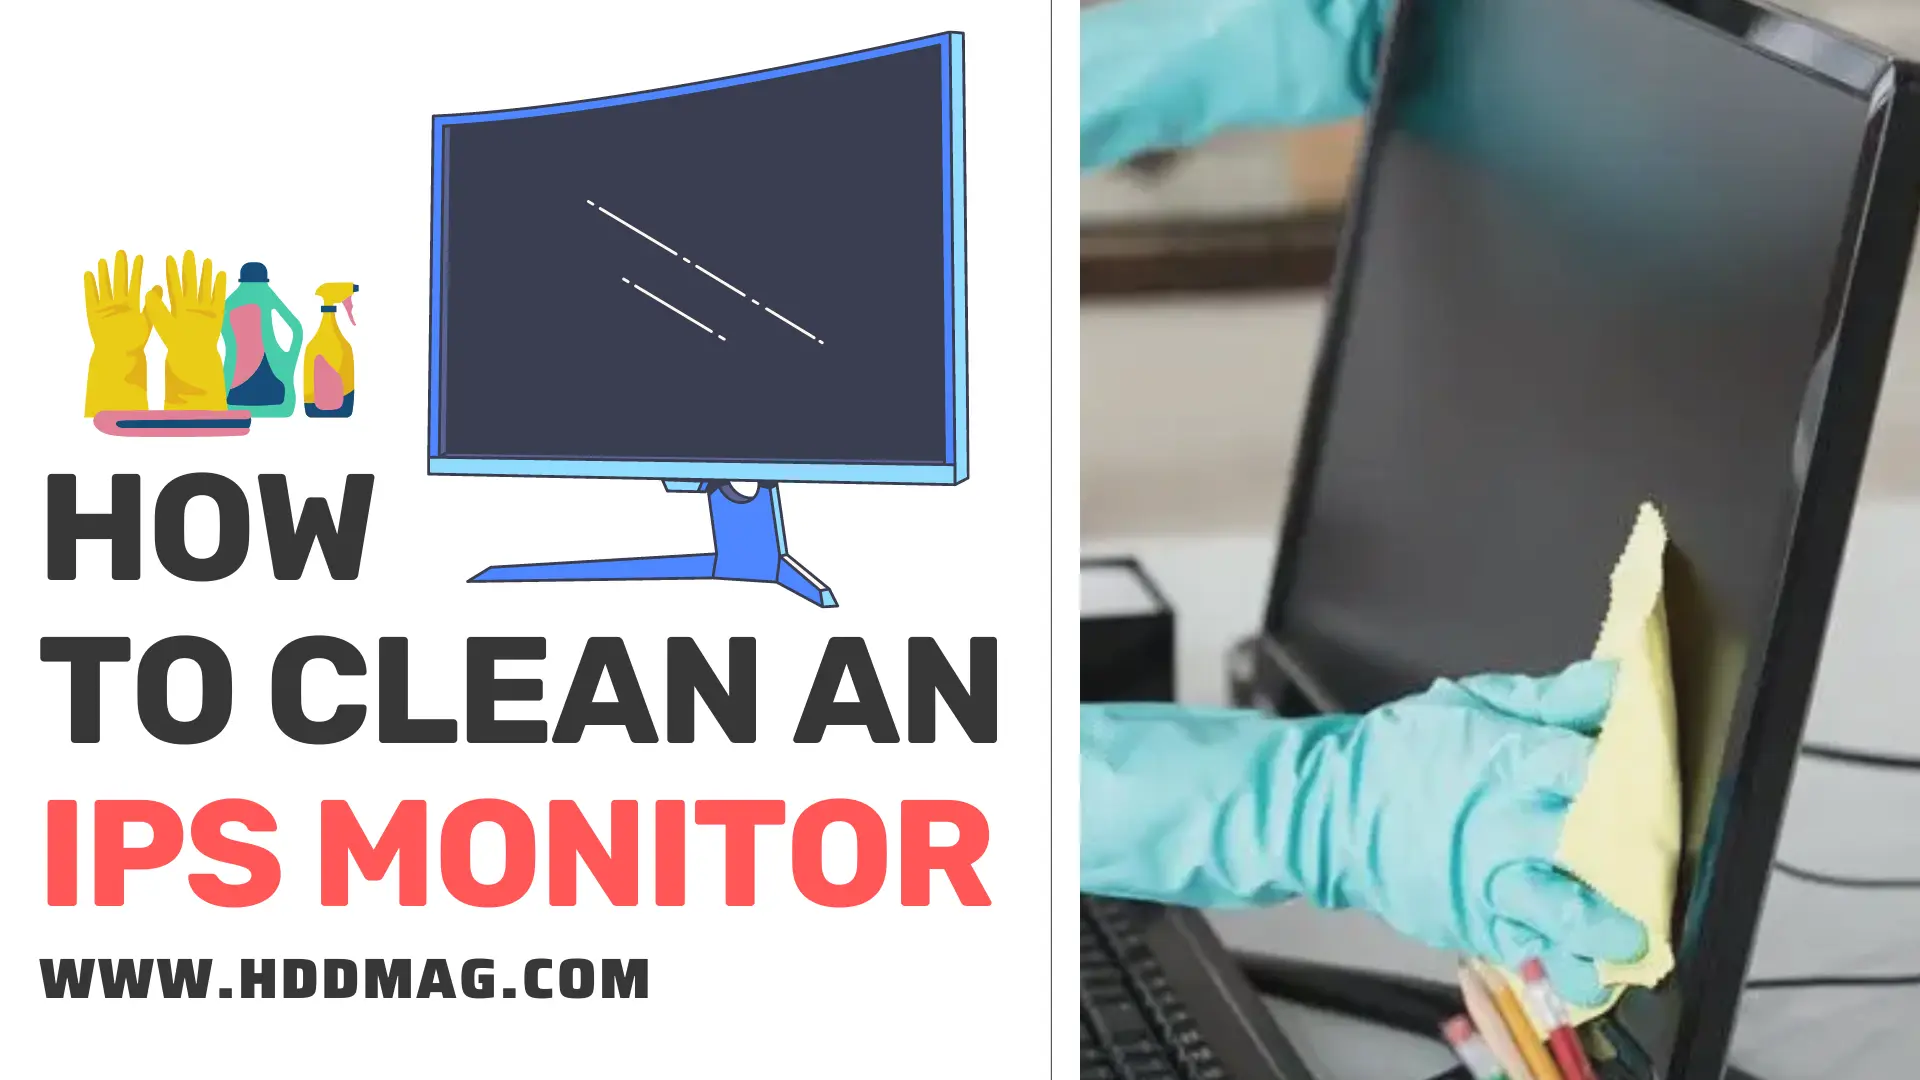 How To Clean an IPS Monitor